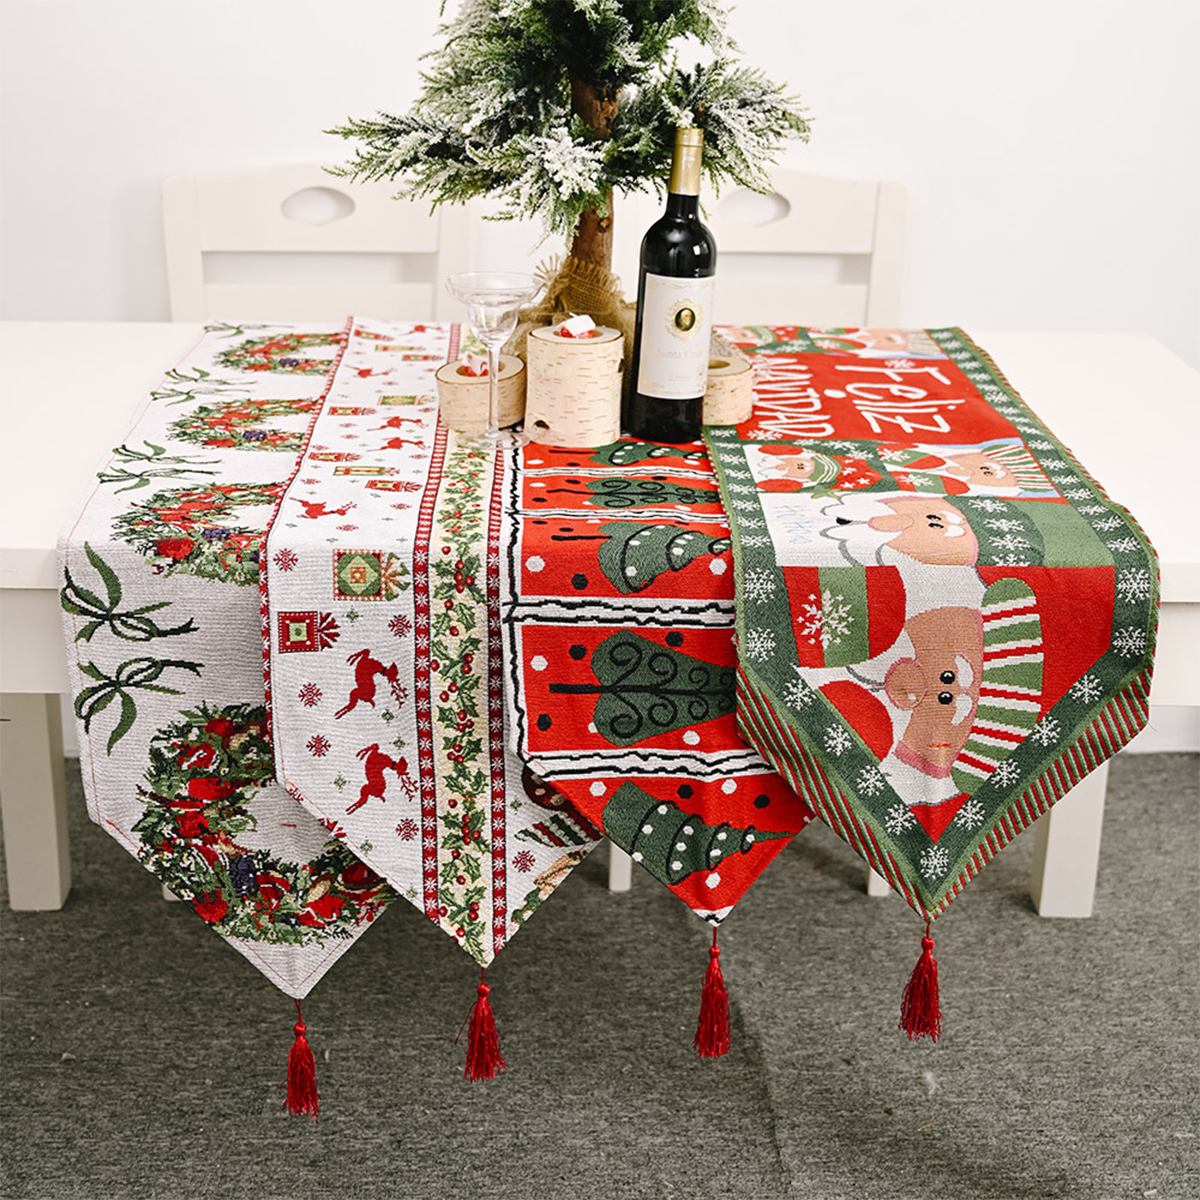 Merry Christmas Table Flag, Cute Cartoon Woven Table Runner, Holiday Santa Elk Tree Pattern Table Cover Cloth 2021 New Year